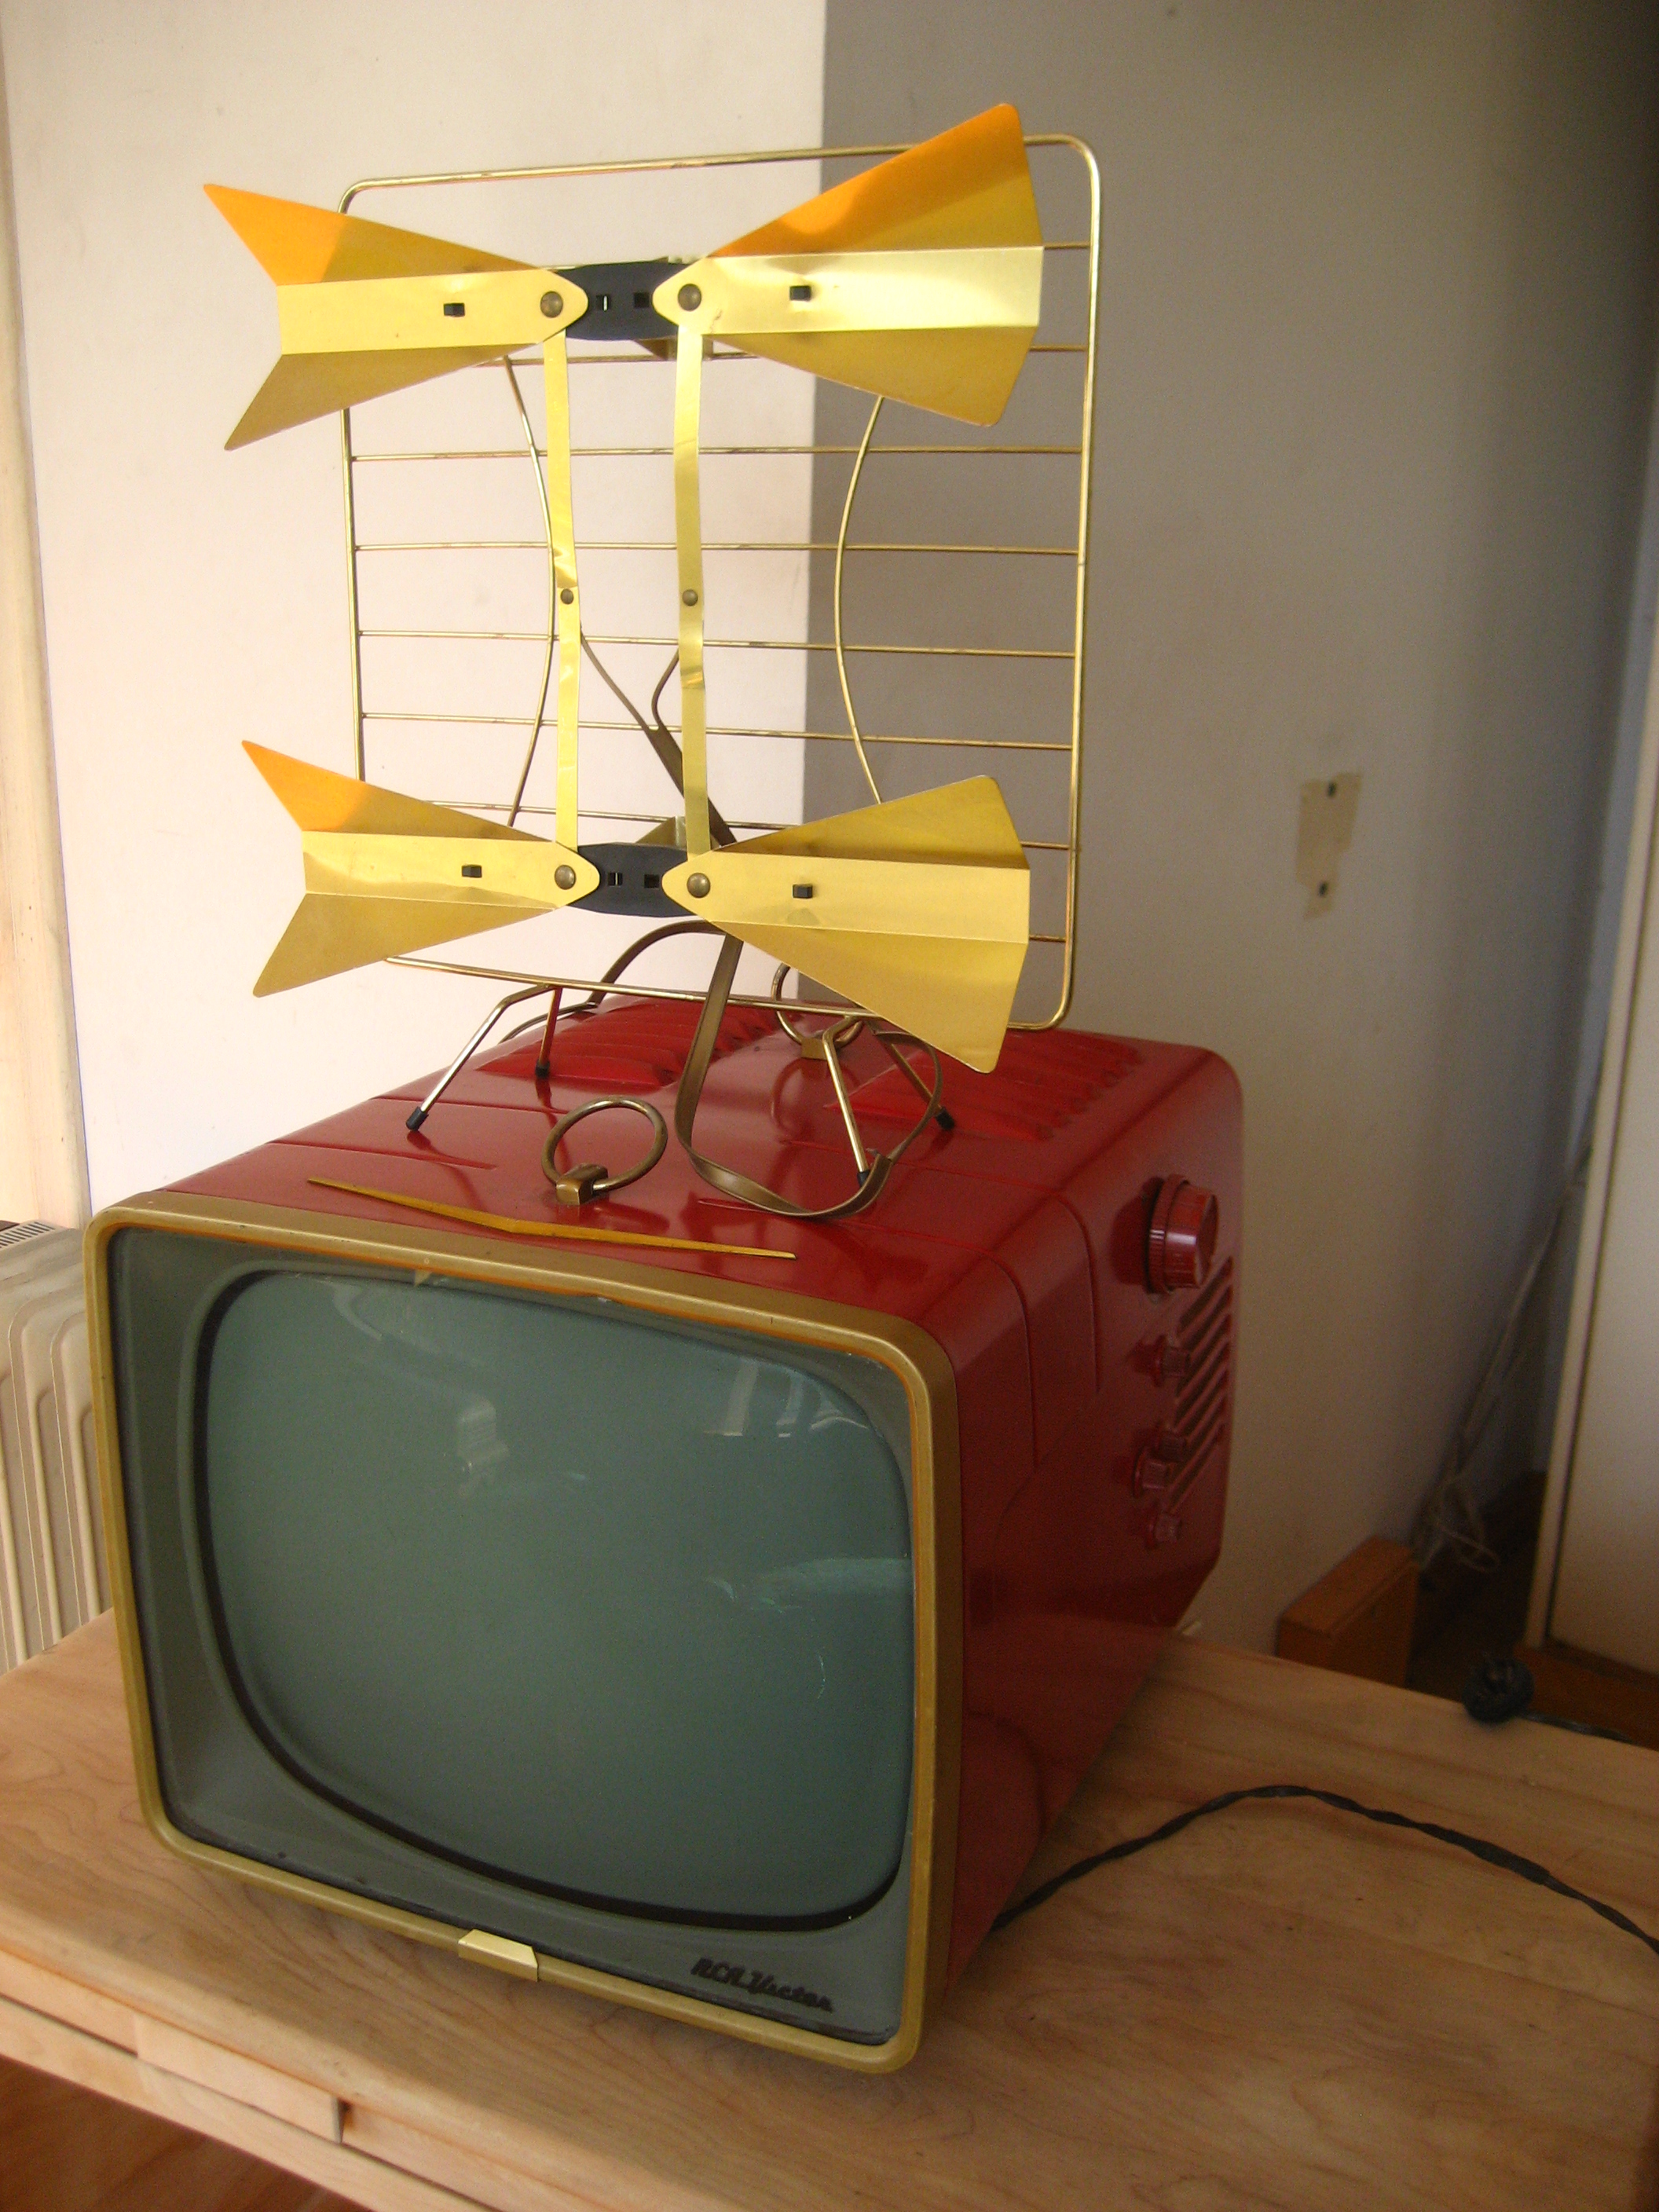 TV RCA red